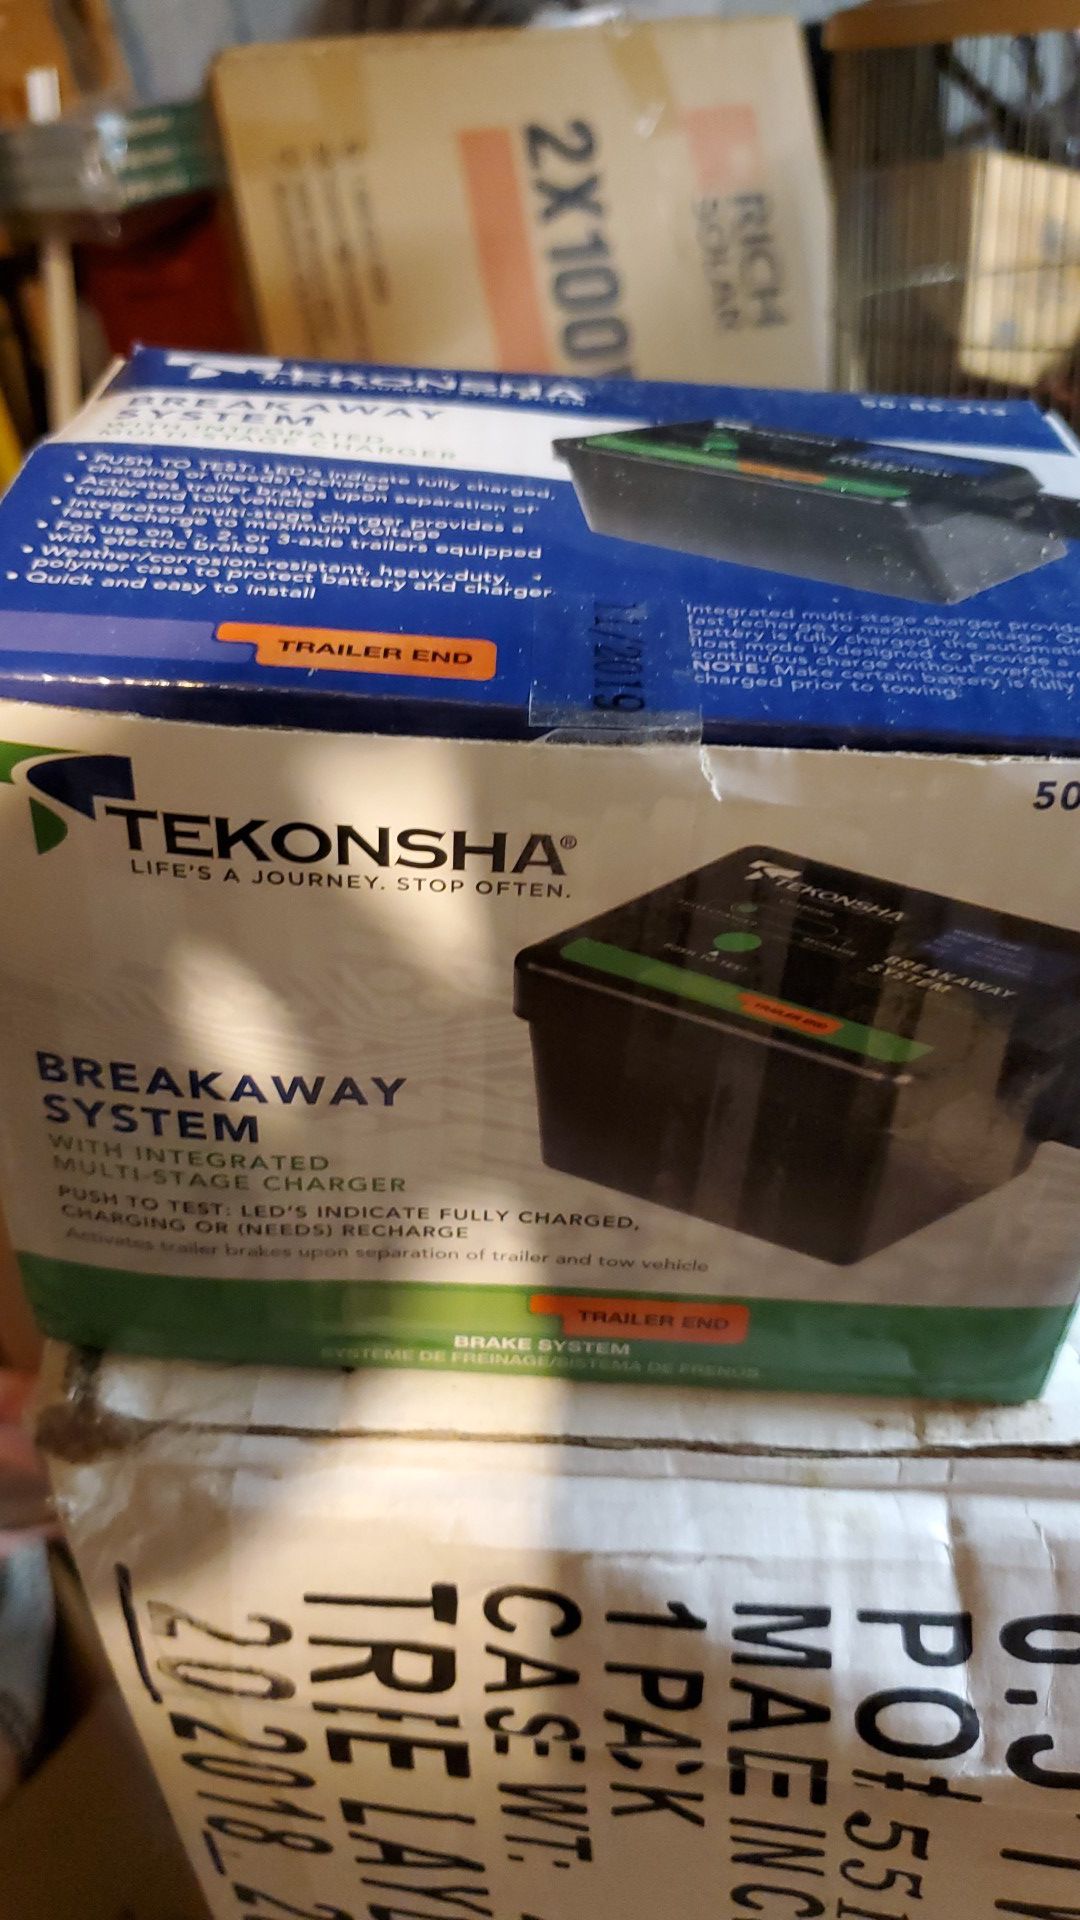 Used tekonsha break away switch for trailer with battery